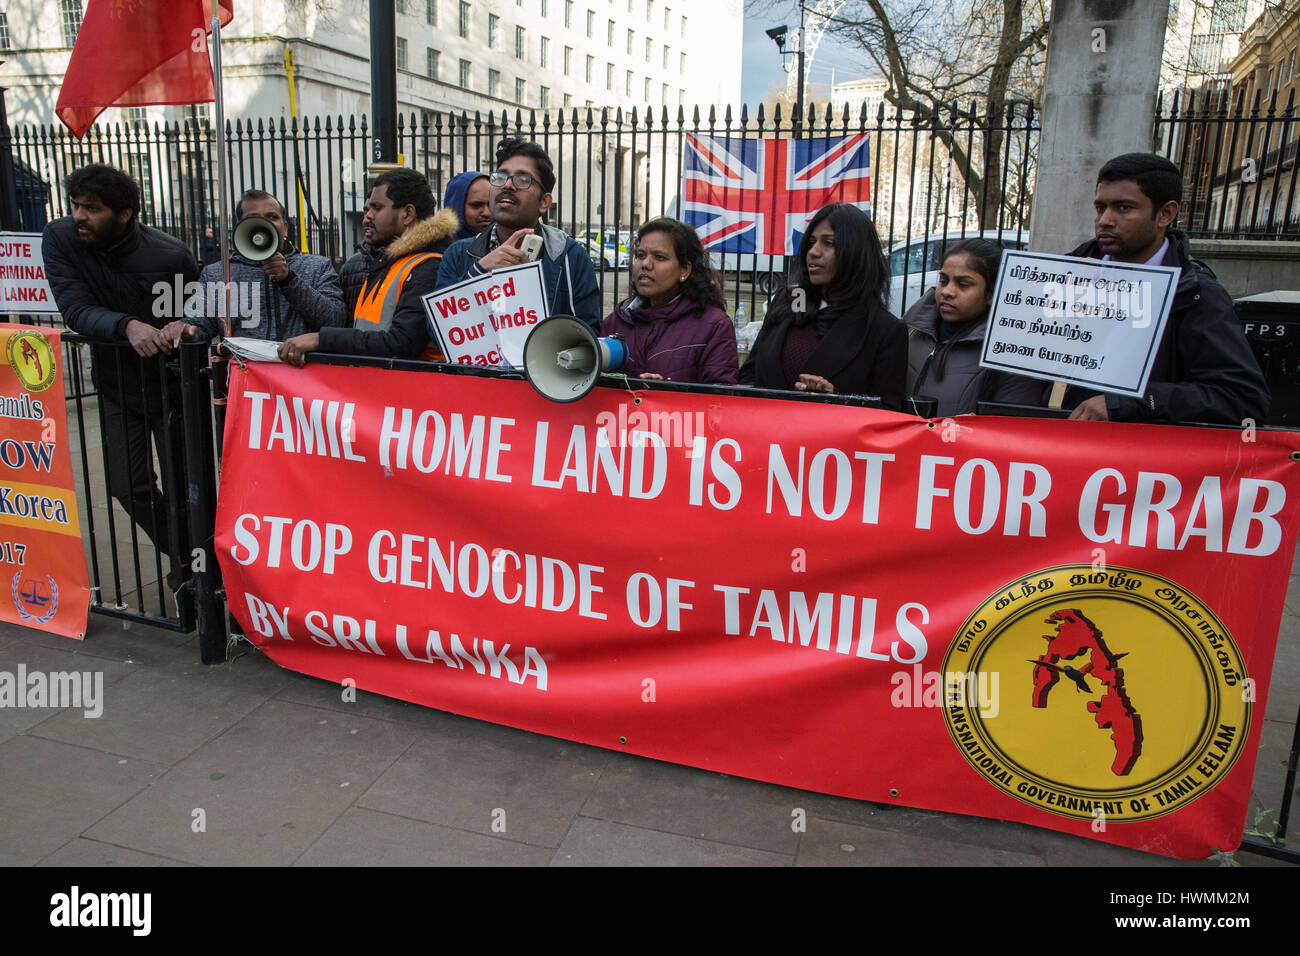 London, UK. 21st March, 2017. British Tamils protest outside Downing Street against genocide against the Tamil people in Sri Lanka. Stock Photo